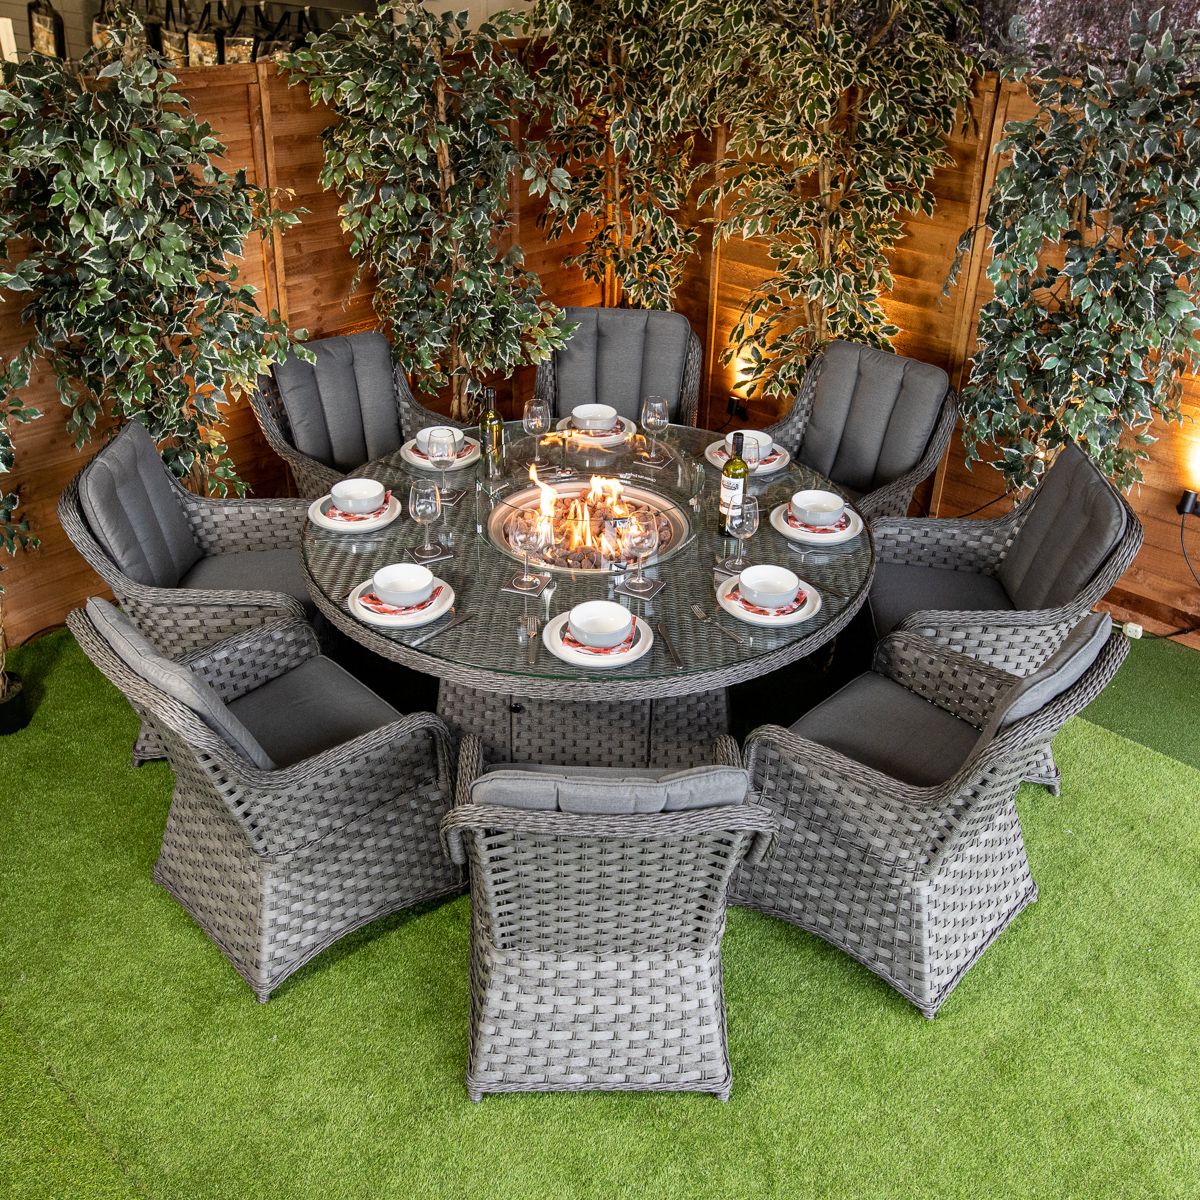 Rattan Garden Furniture: Creating a Zen Oasis for Relaxation and Meditation